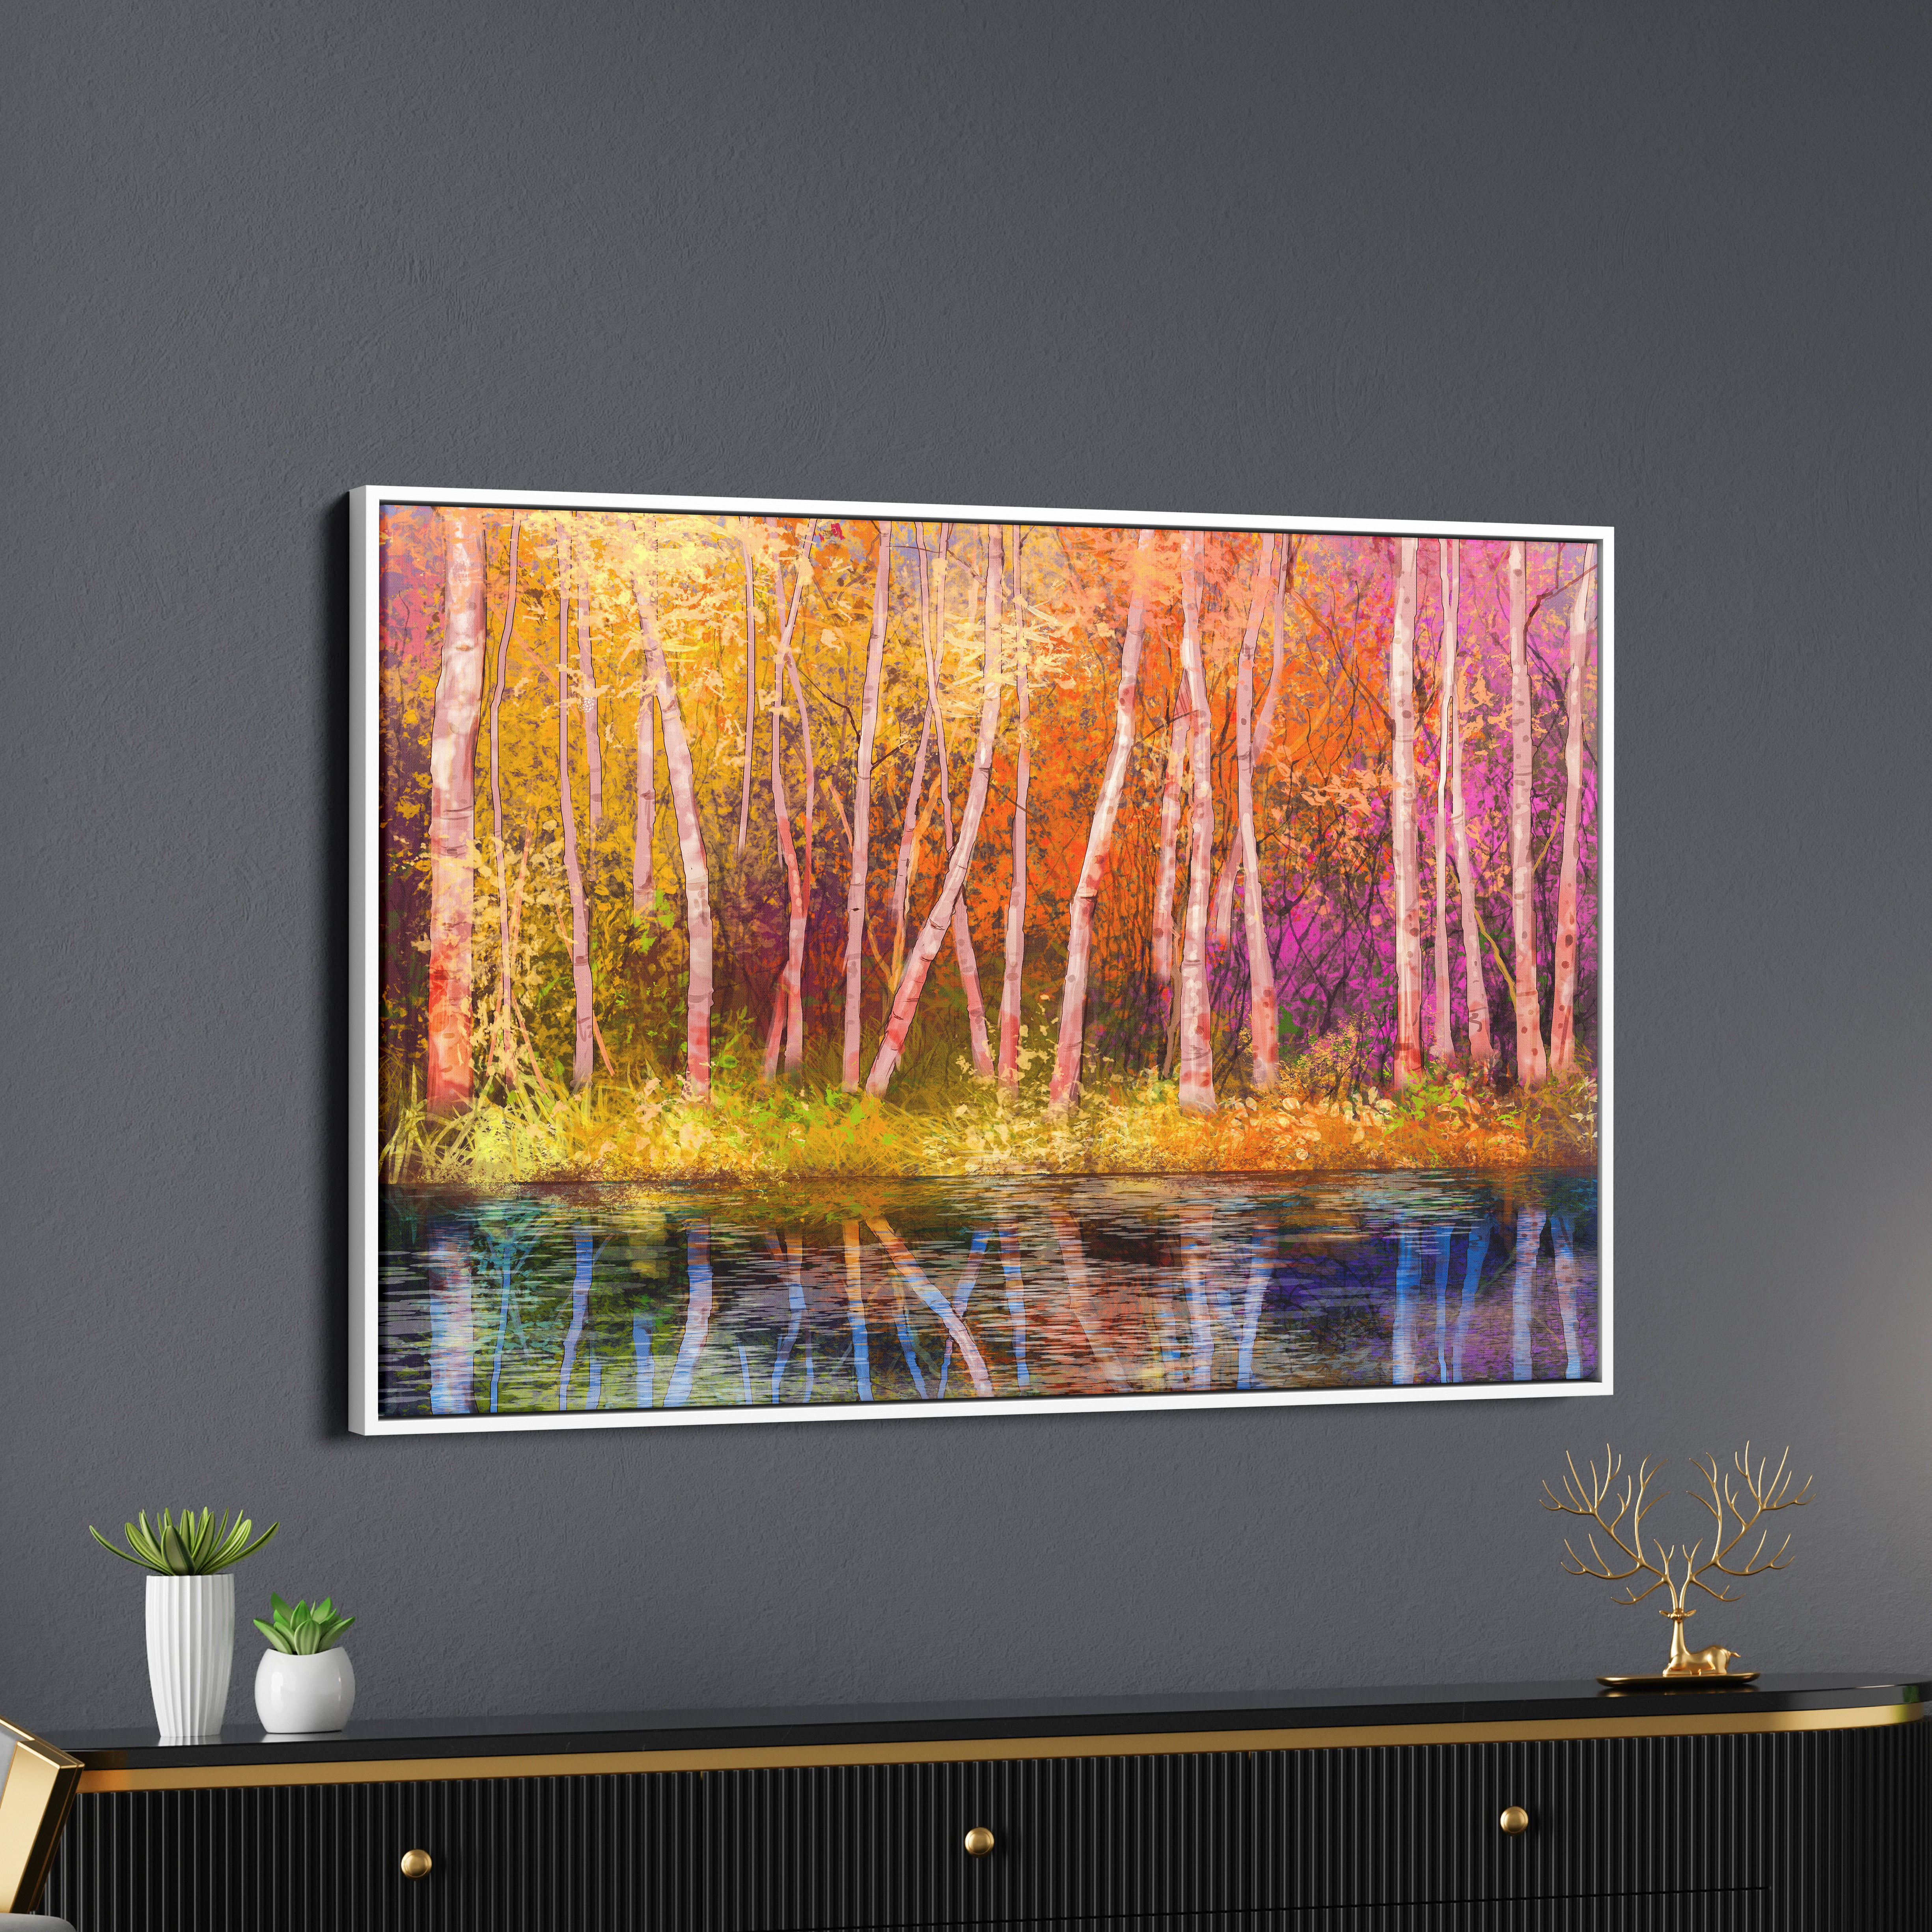 Autumn Forest Canvas Wall Painting